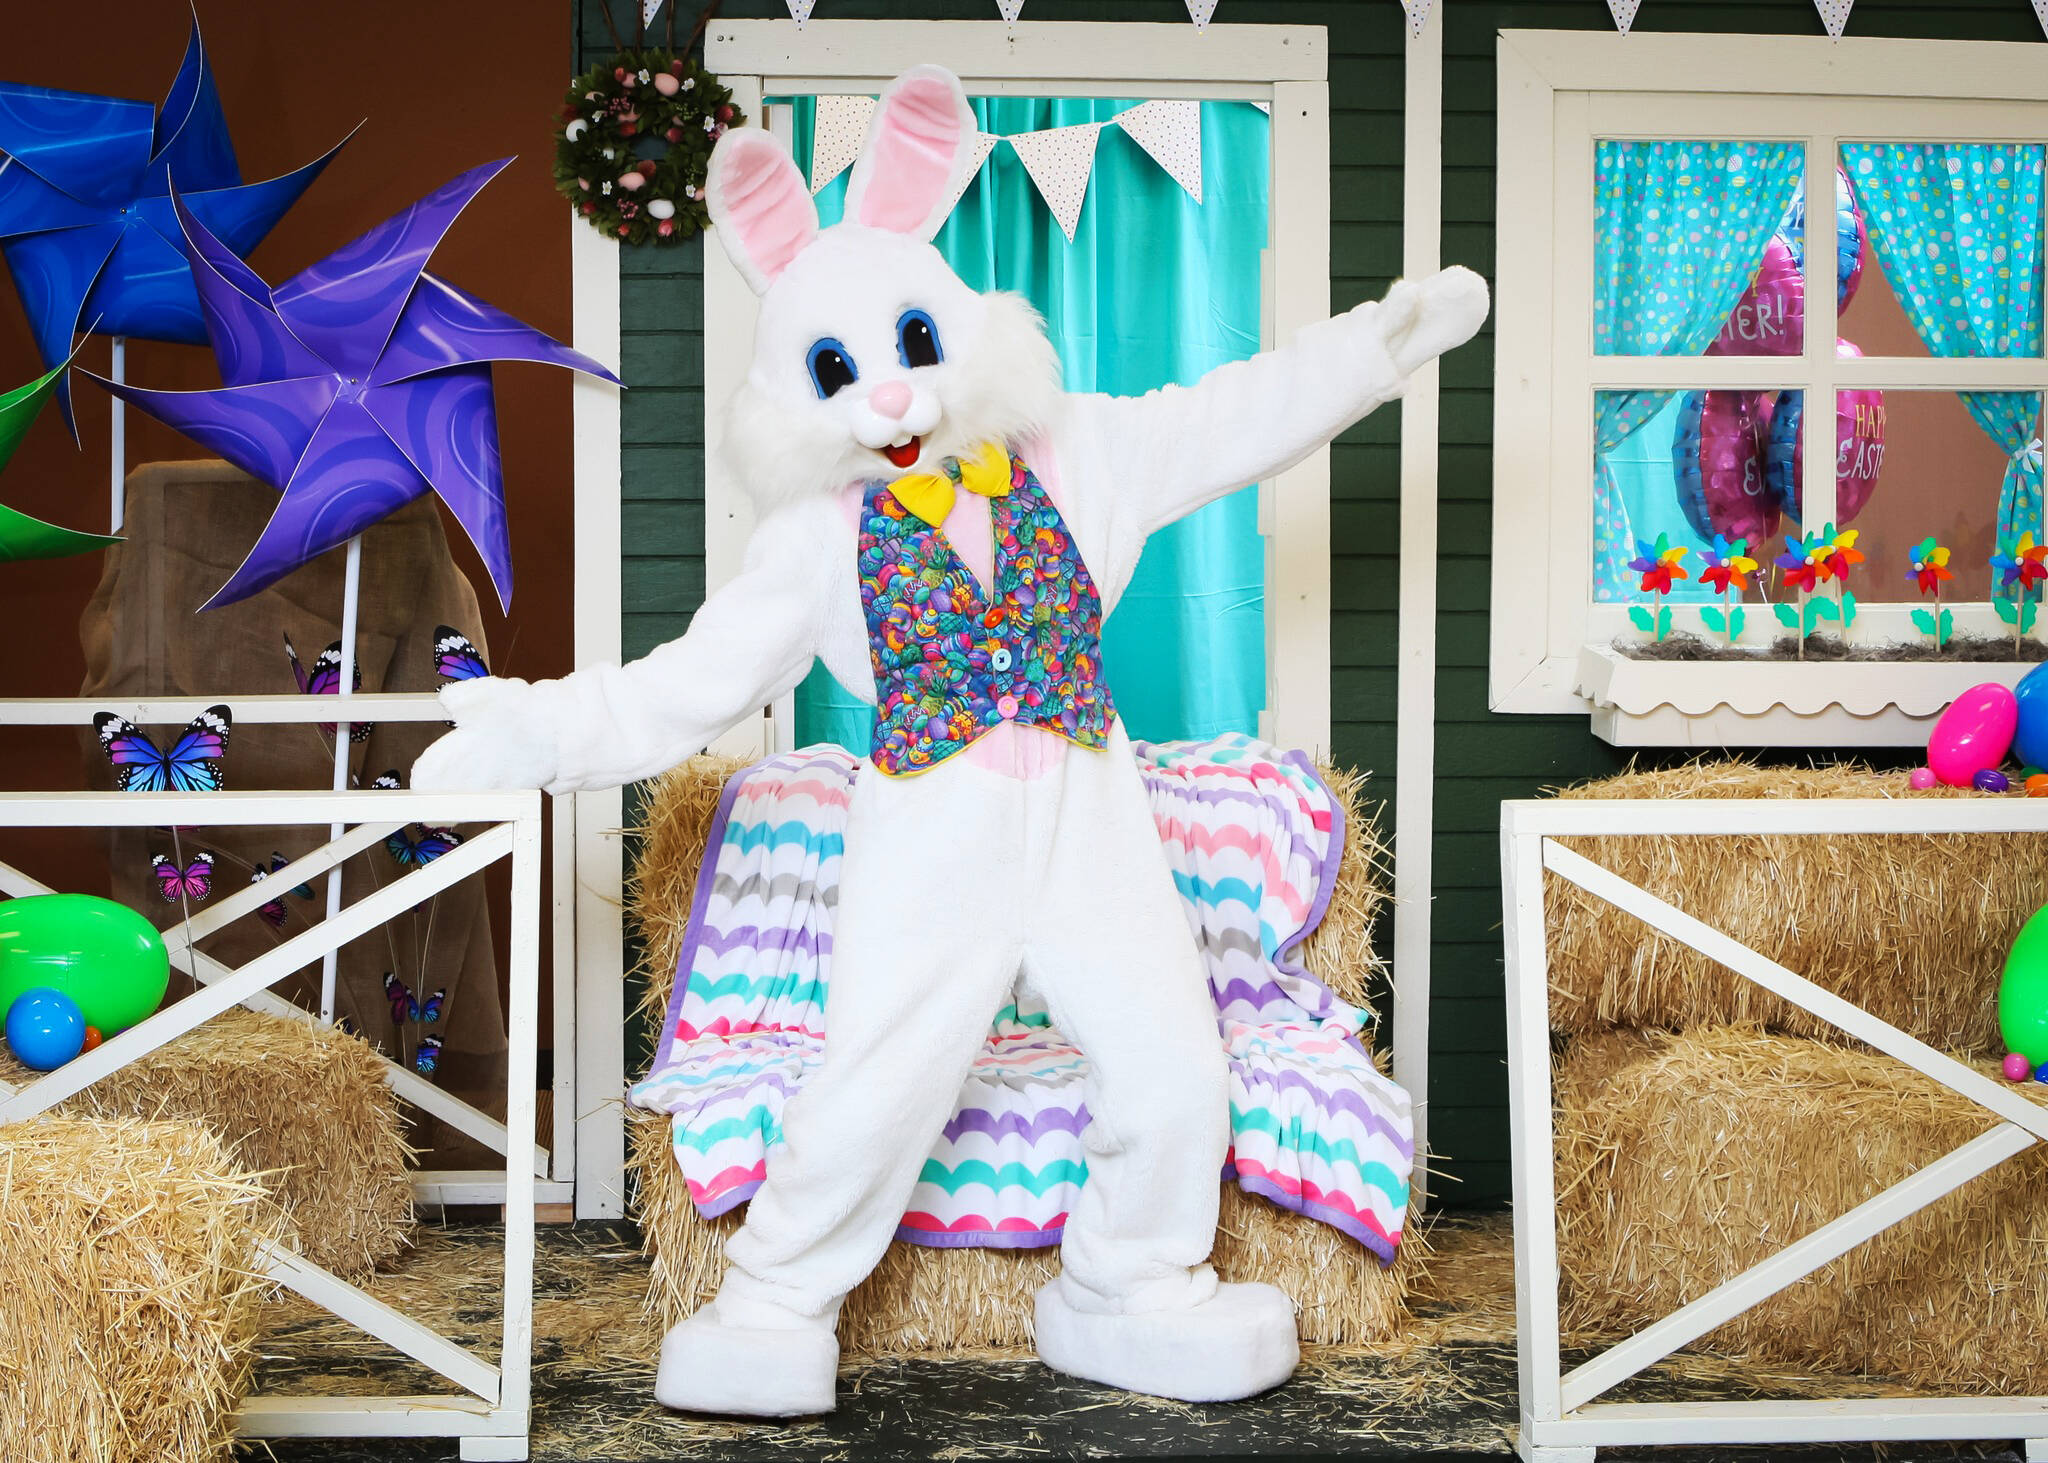 The Easter bunny will be at Kent Station from 11 a.m. to 1 p.m. Saturday, April 8. COURTESY FILE PHOTO, Kent Station